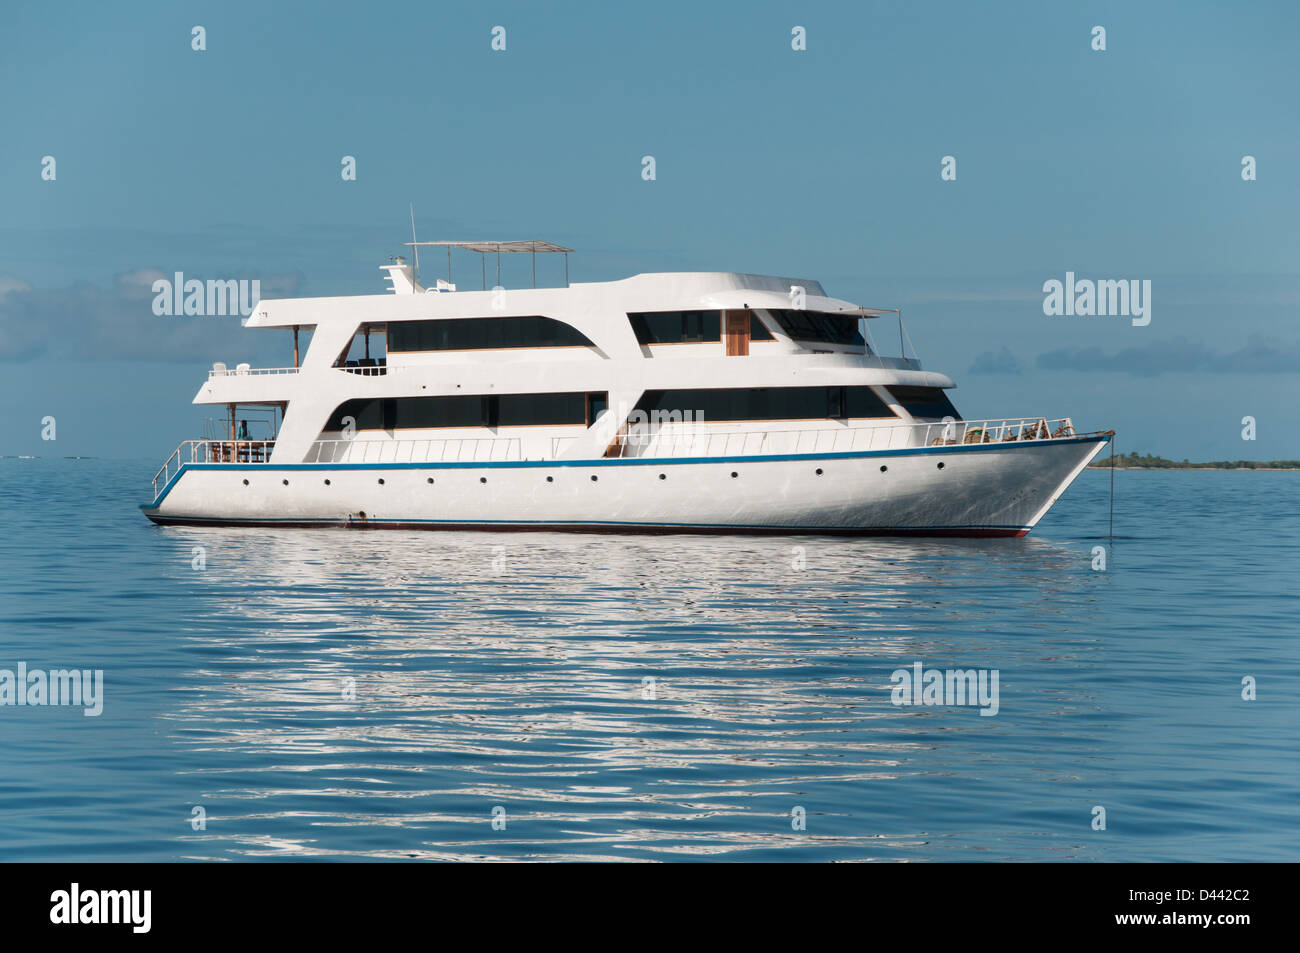 Motor yacht used for holiday makers Stock Photo